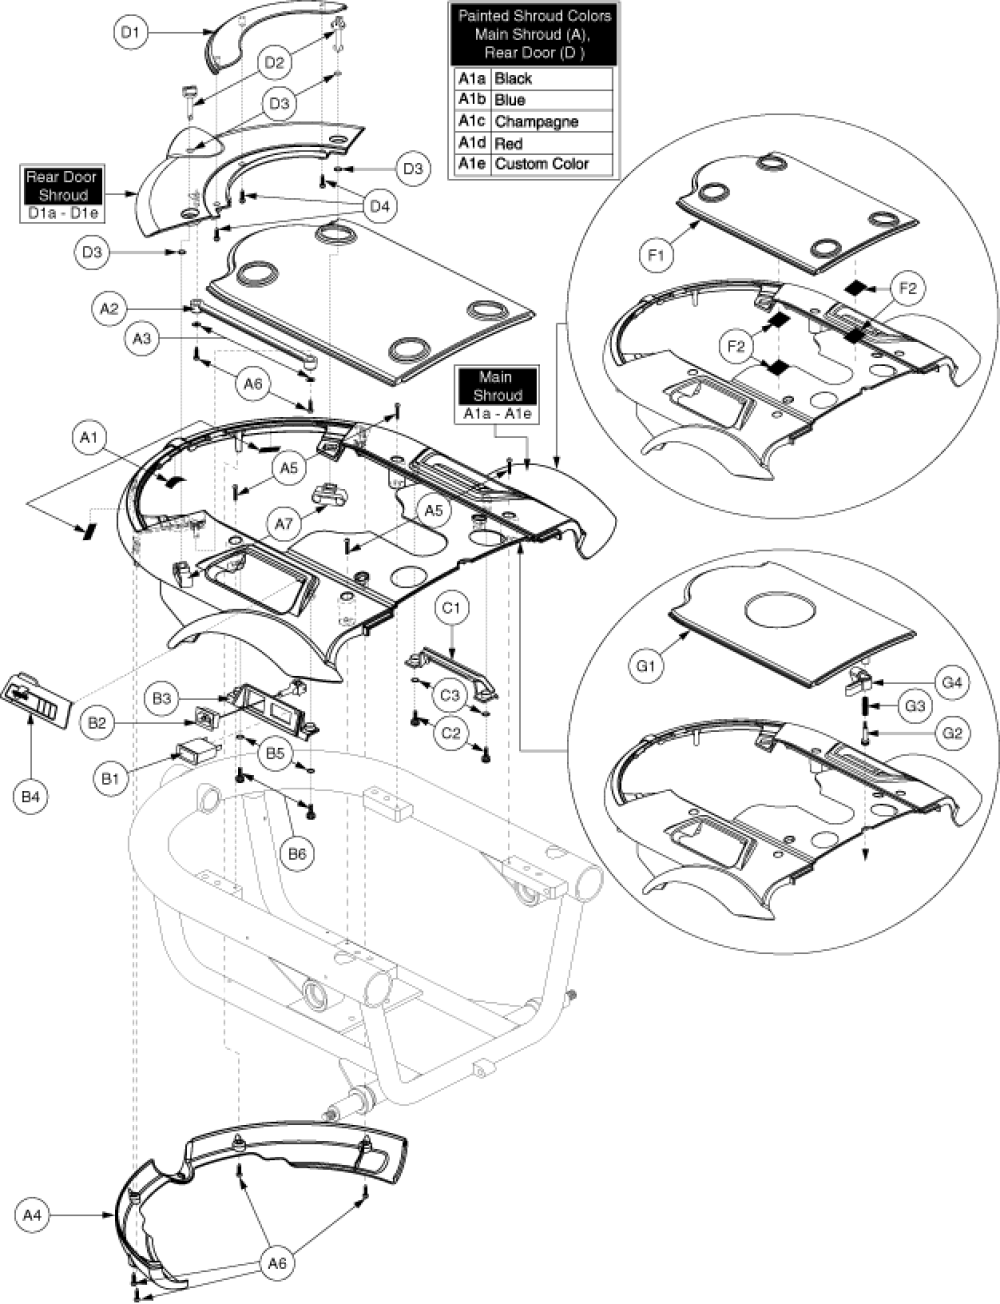 Shroud Assembly - Onboard parts diagram